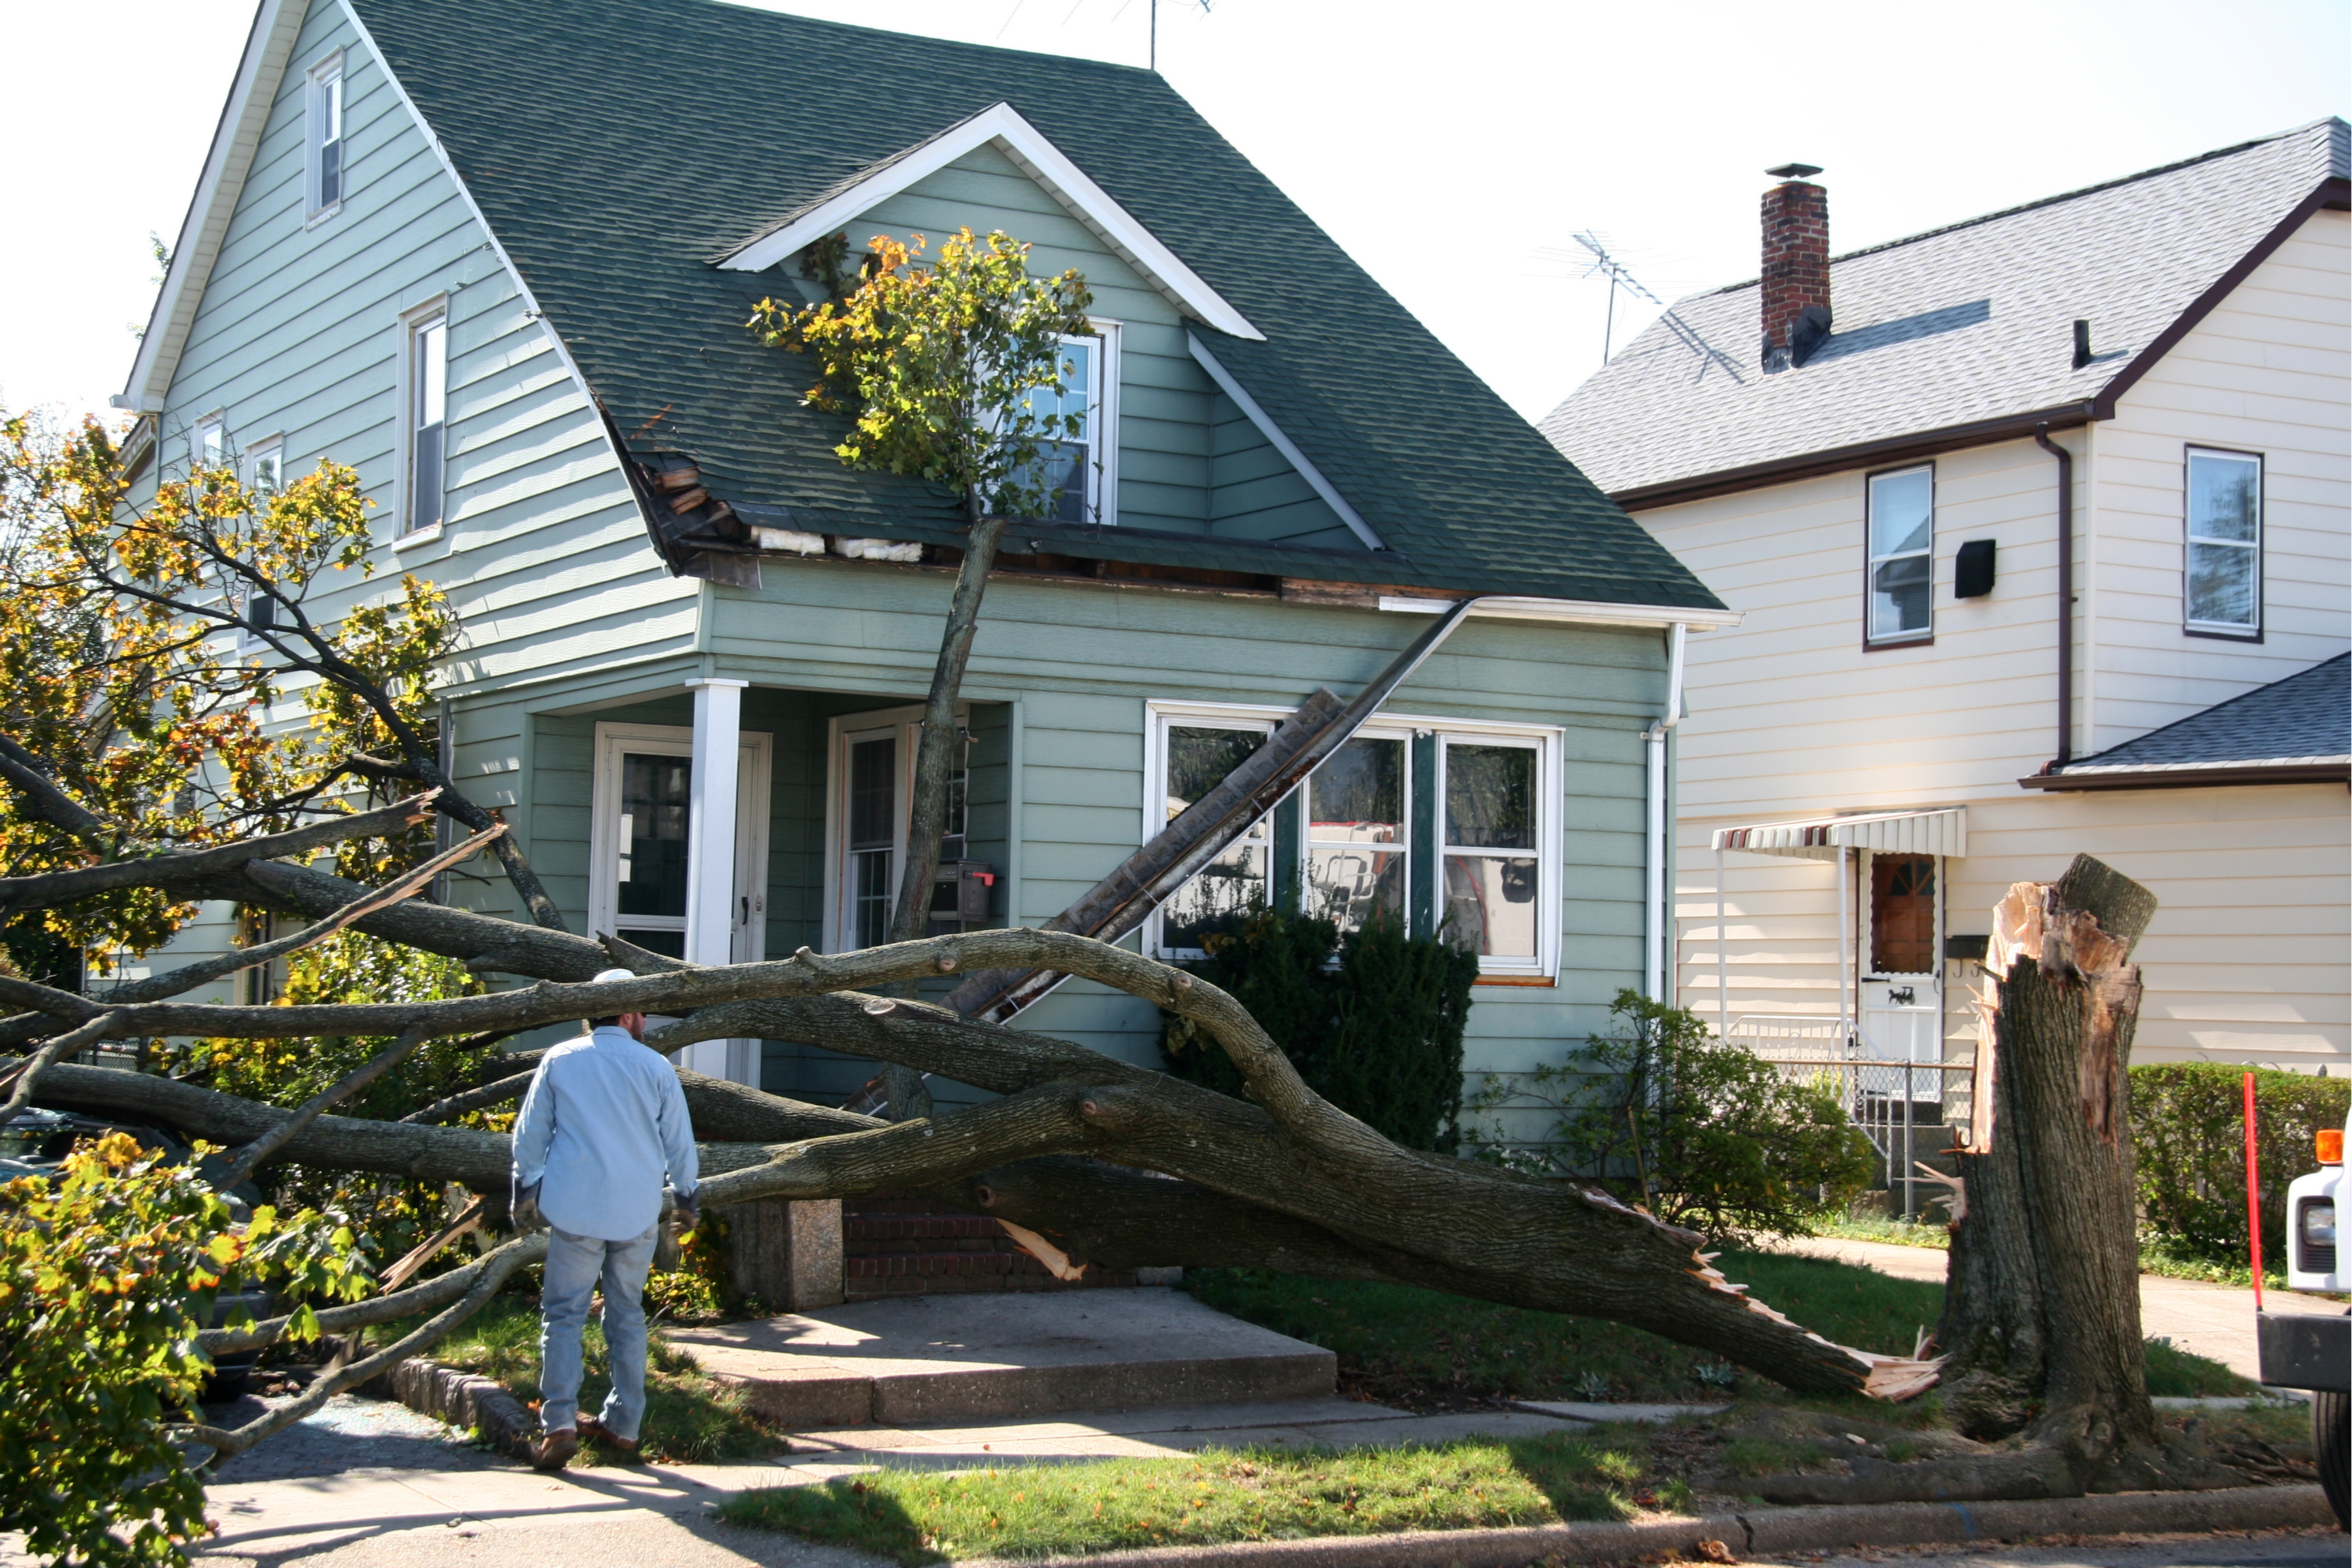 A home with damaged roofing and siding from a falling tree